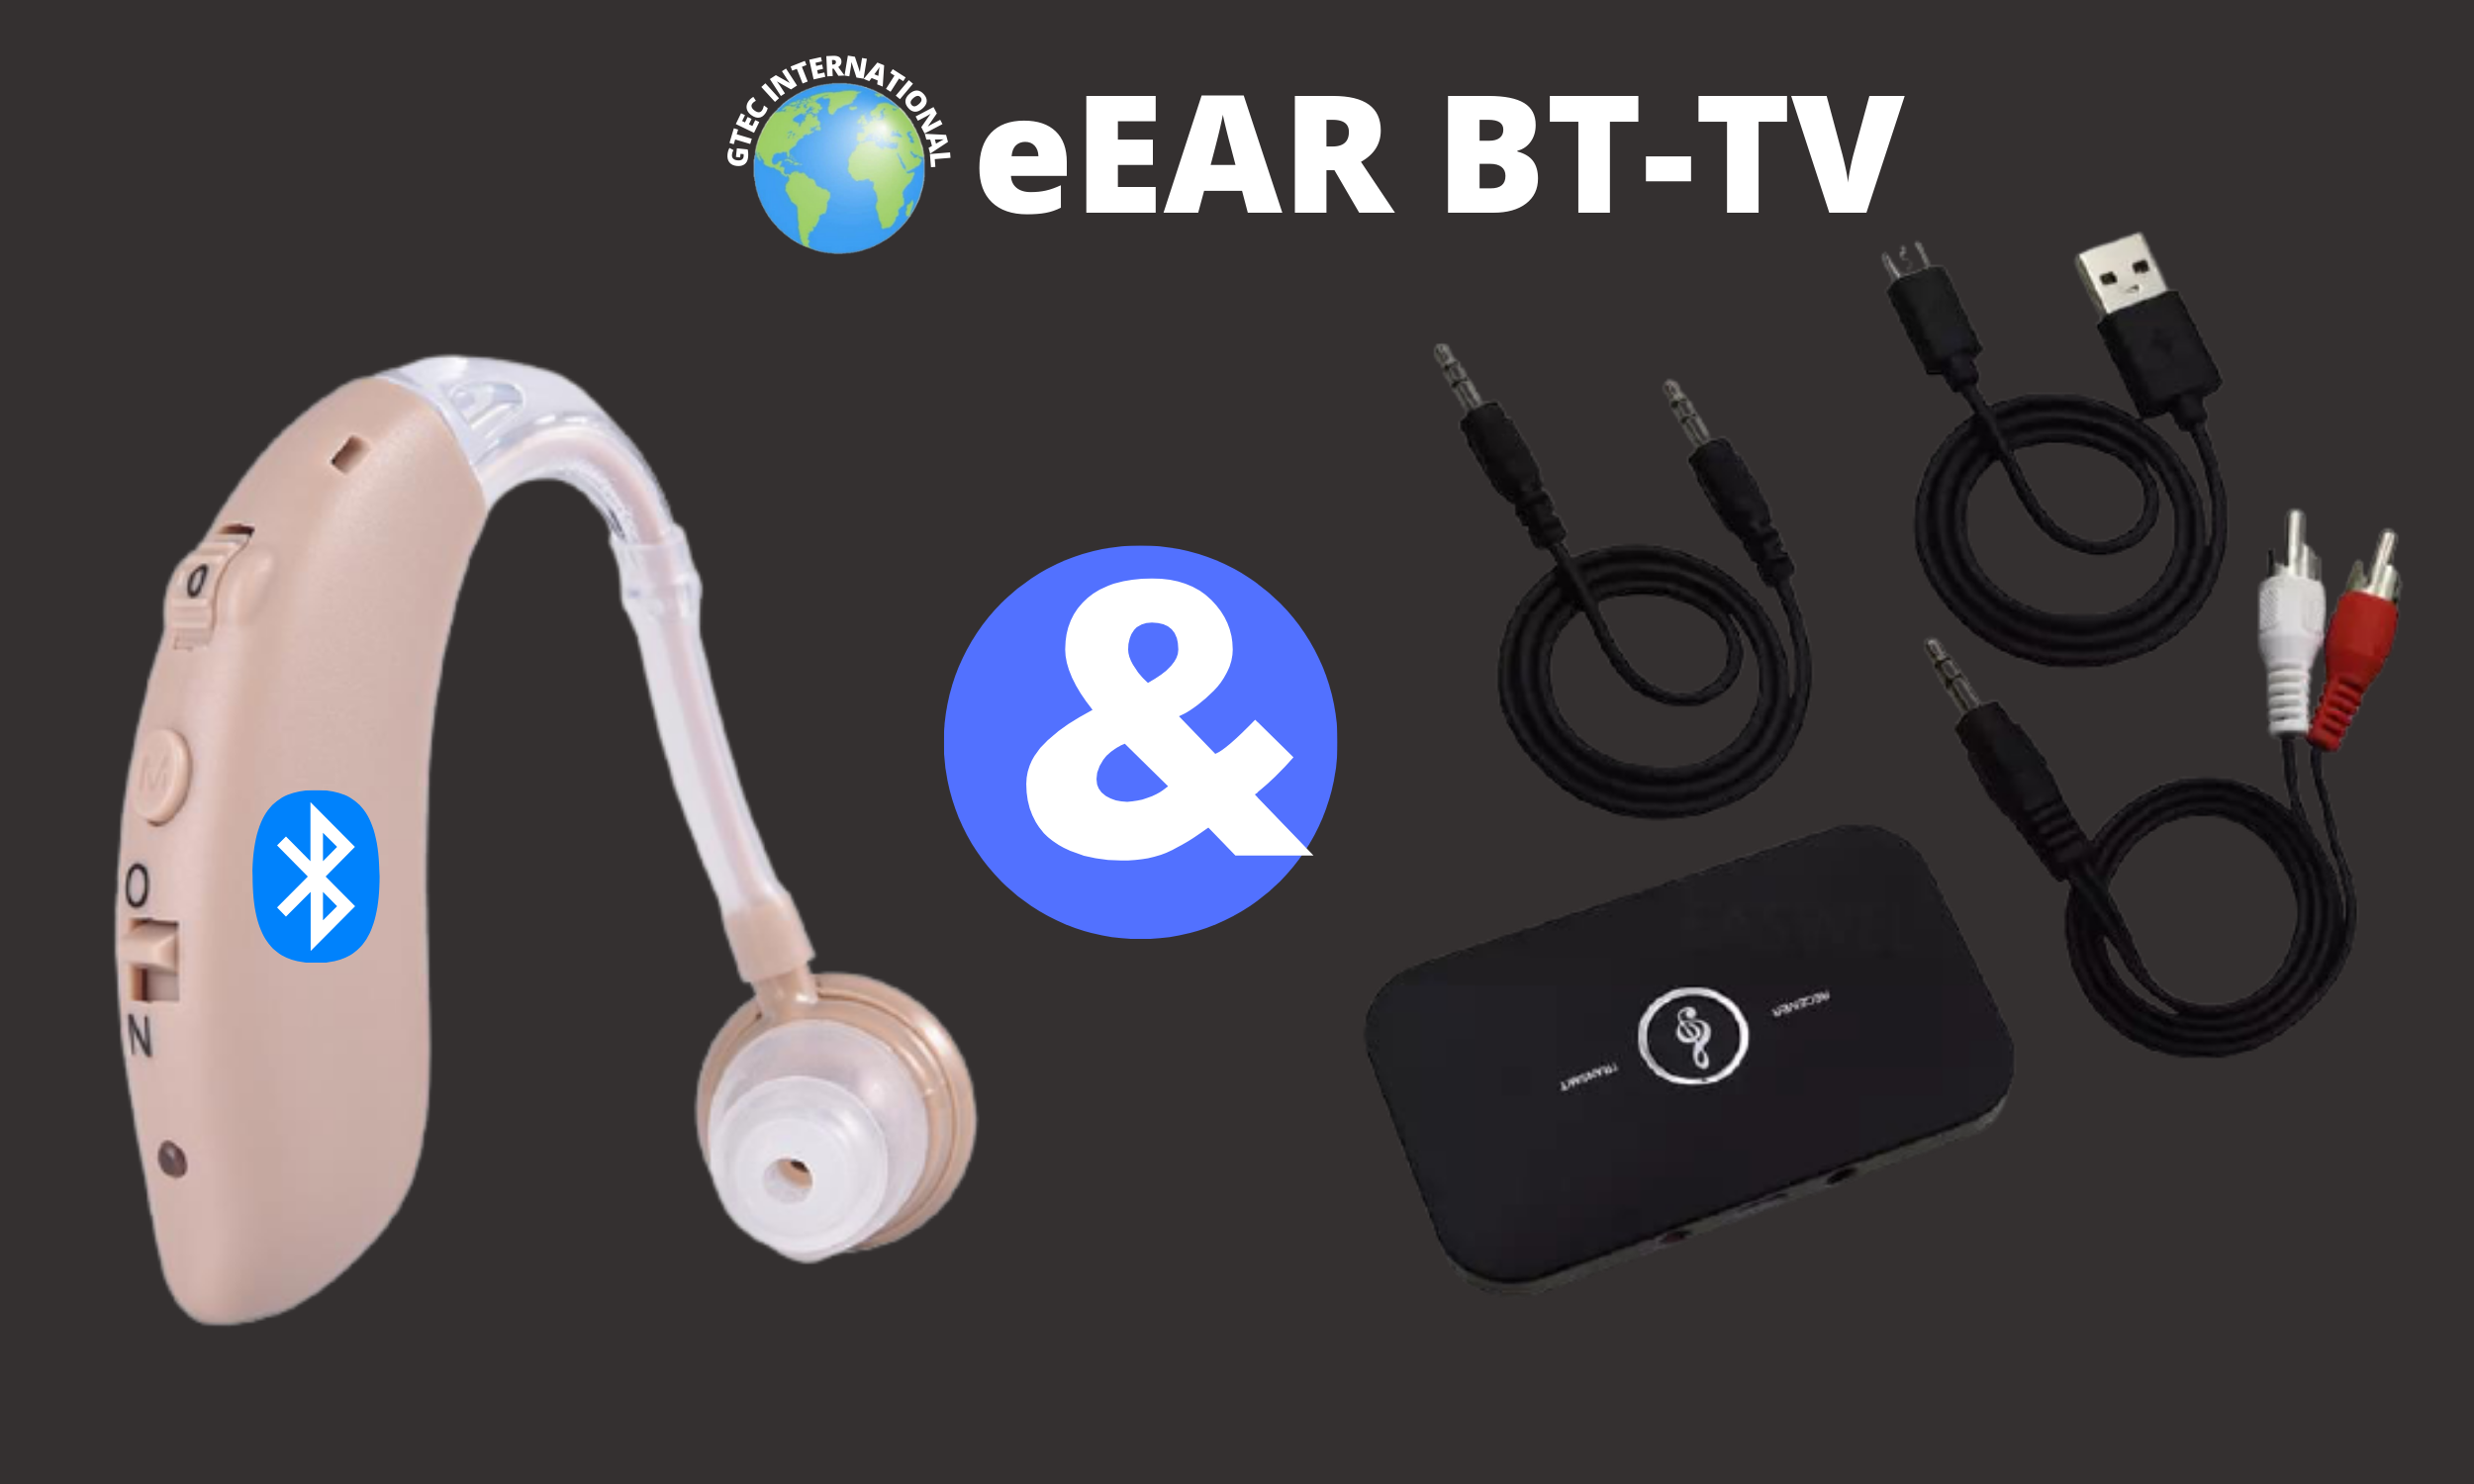 eEAR® eEAR-BT-TV-02 eEAR Bluetooth TV System Perfect Solution for TV listening for Hearing Aid Users & Hearing Impairment Designed and Engineered in the USA